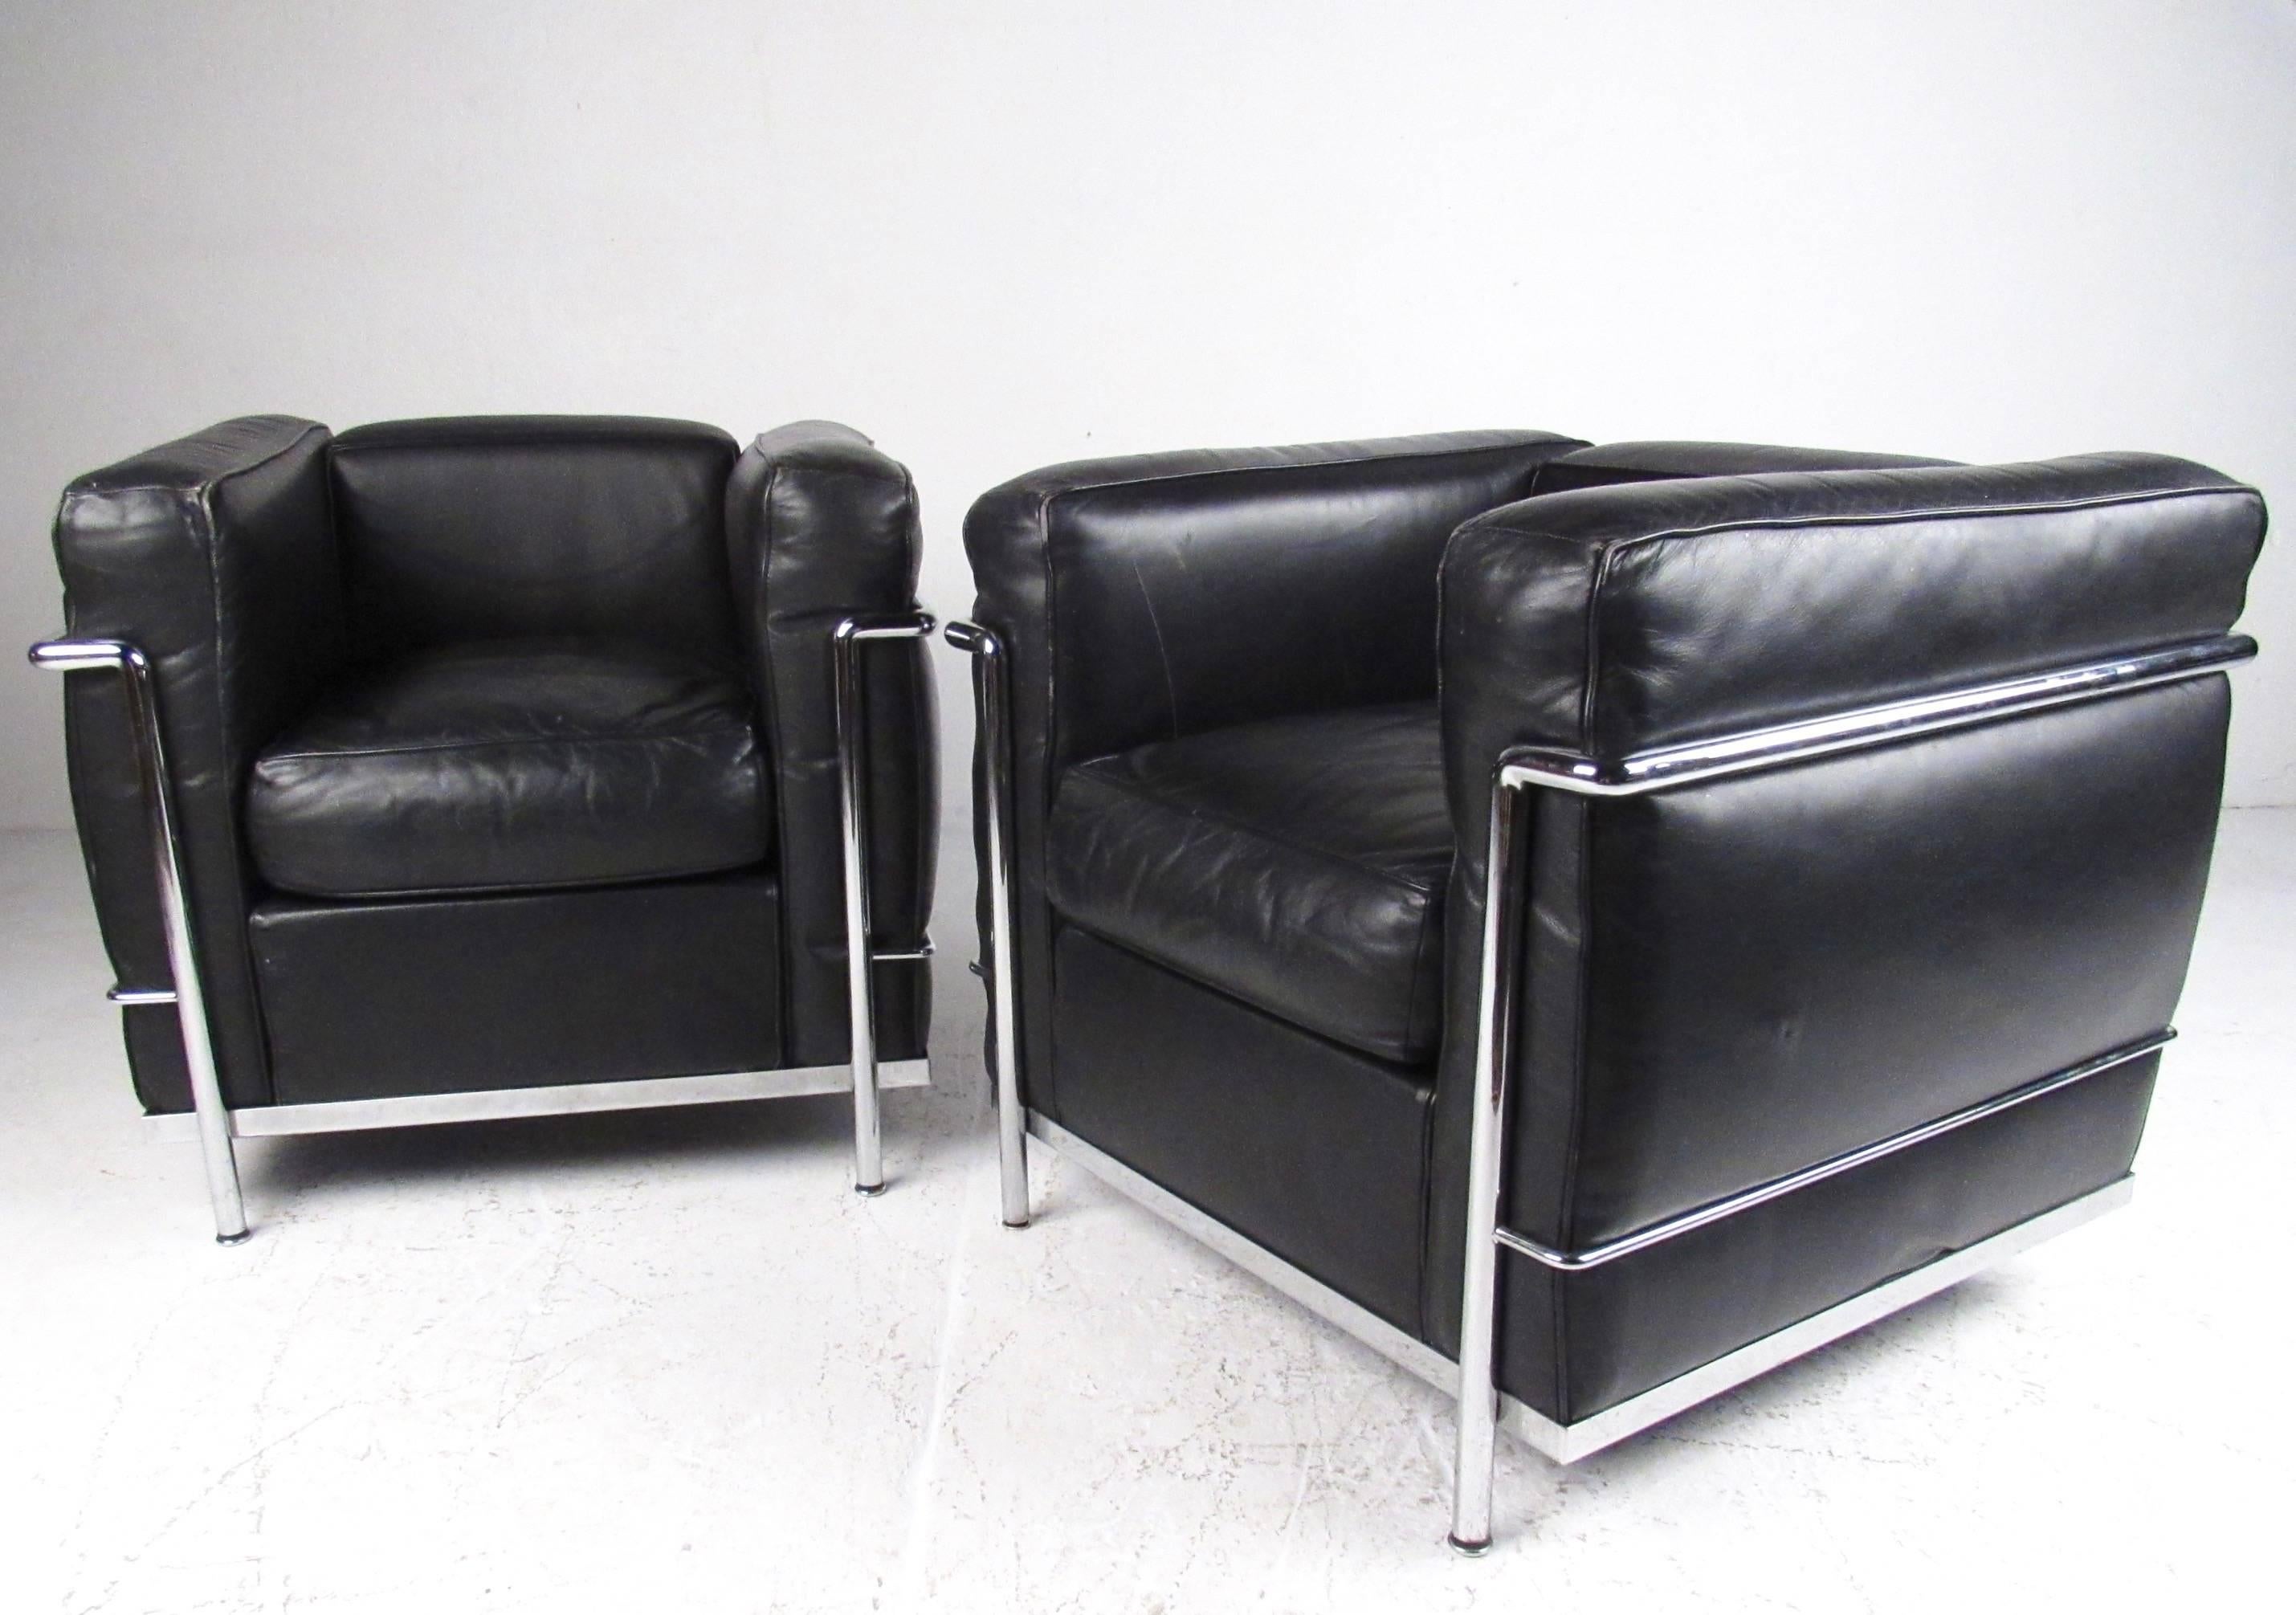 This iconic Le Corbusier LC set features iconic mid-century design by Italian manufacturer Cassina. Three piece matching set features matched pair of LC2 club chairs with LC3 sofa, all with vintage leather upholstery and sturdy chrome frame. Perfect